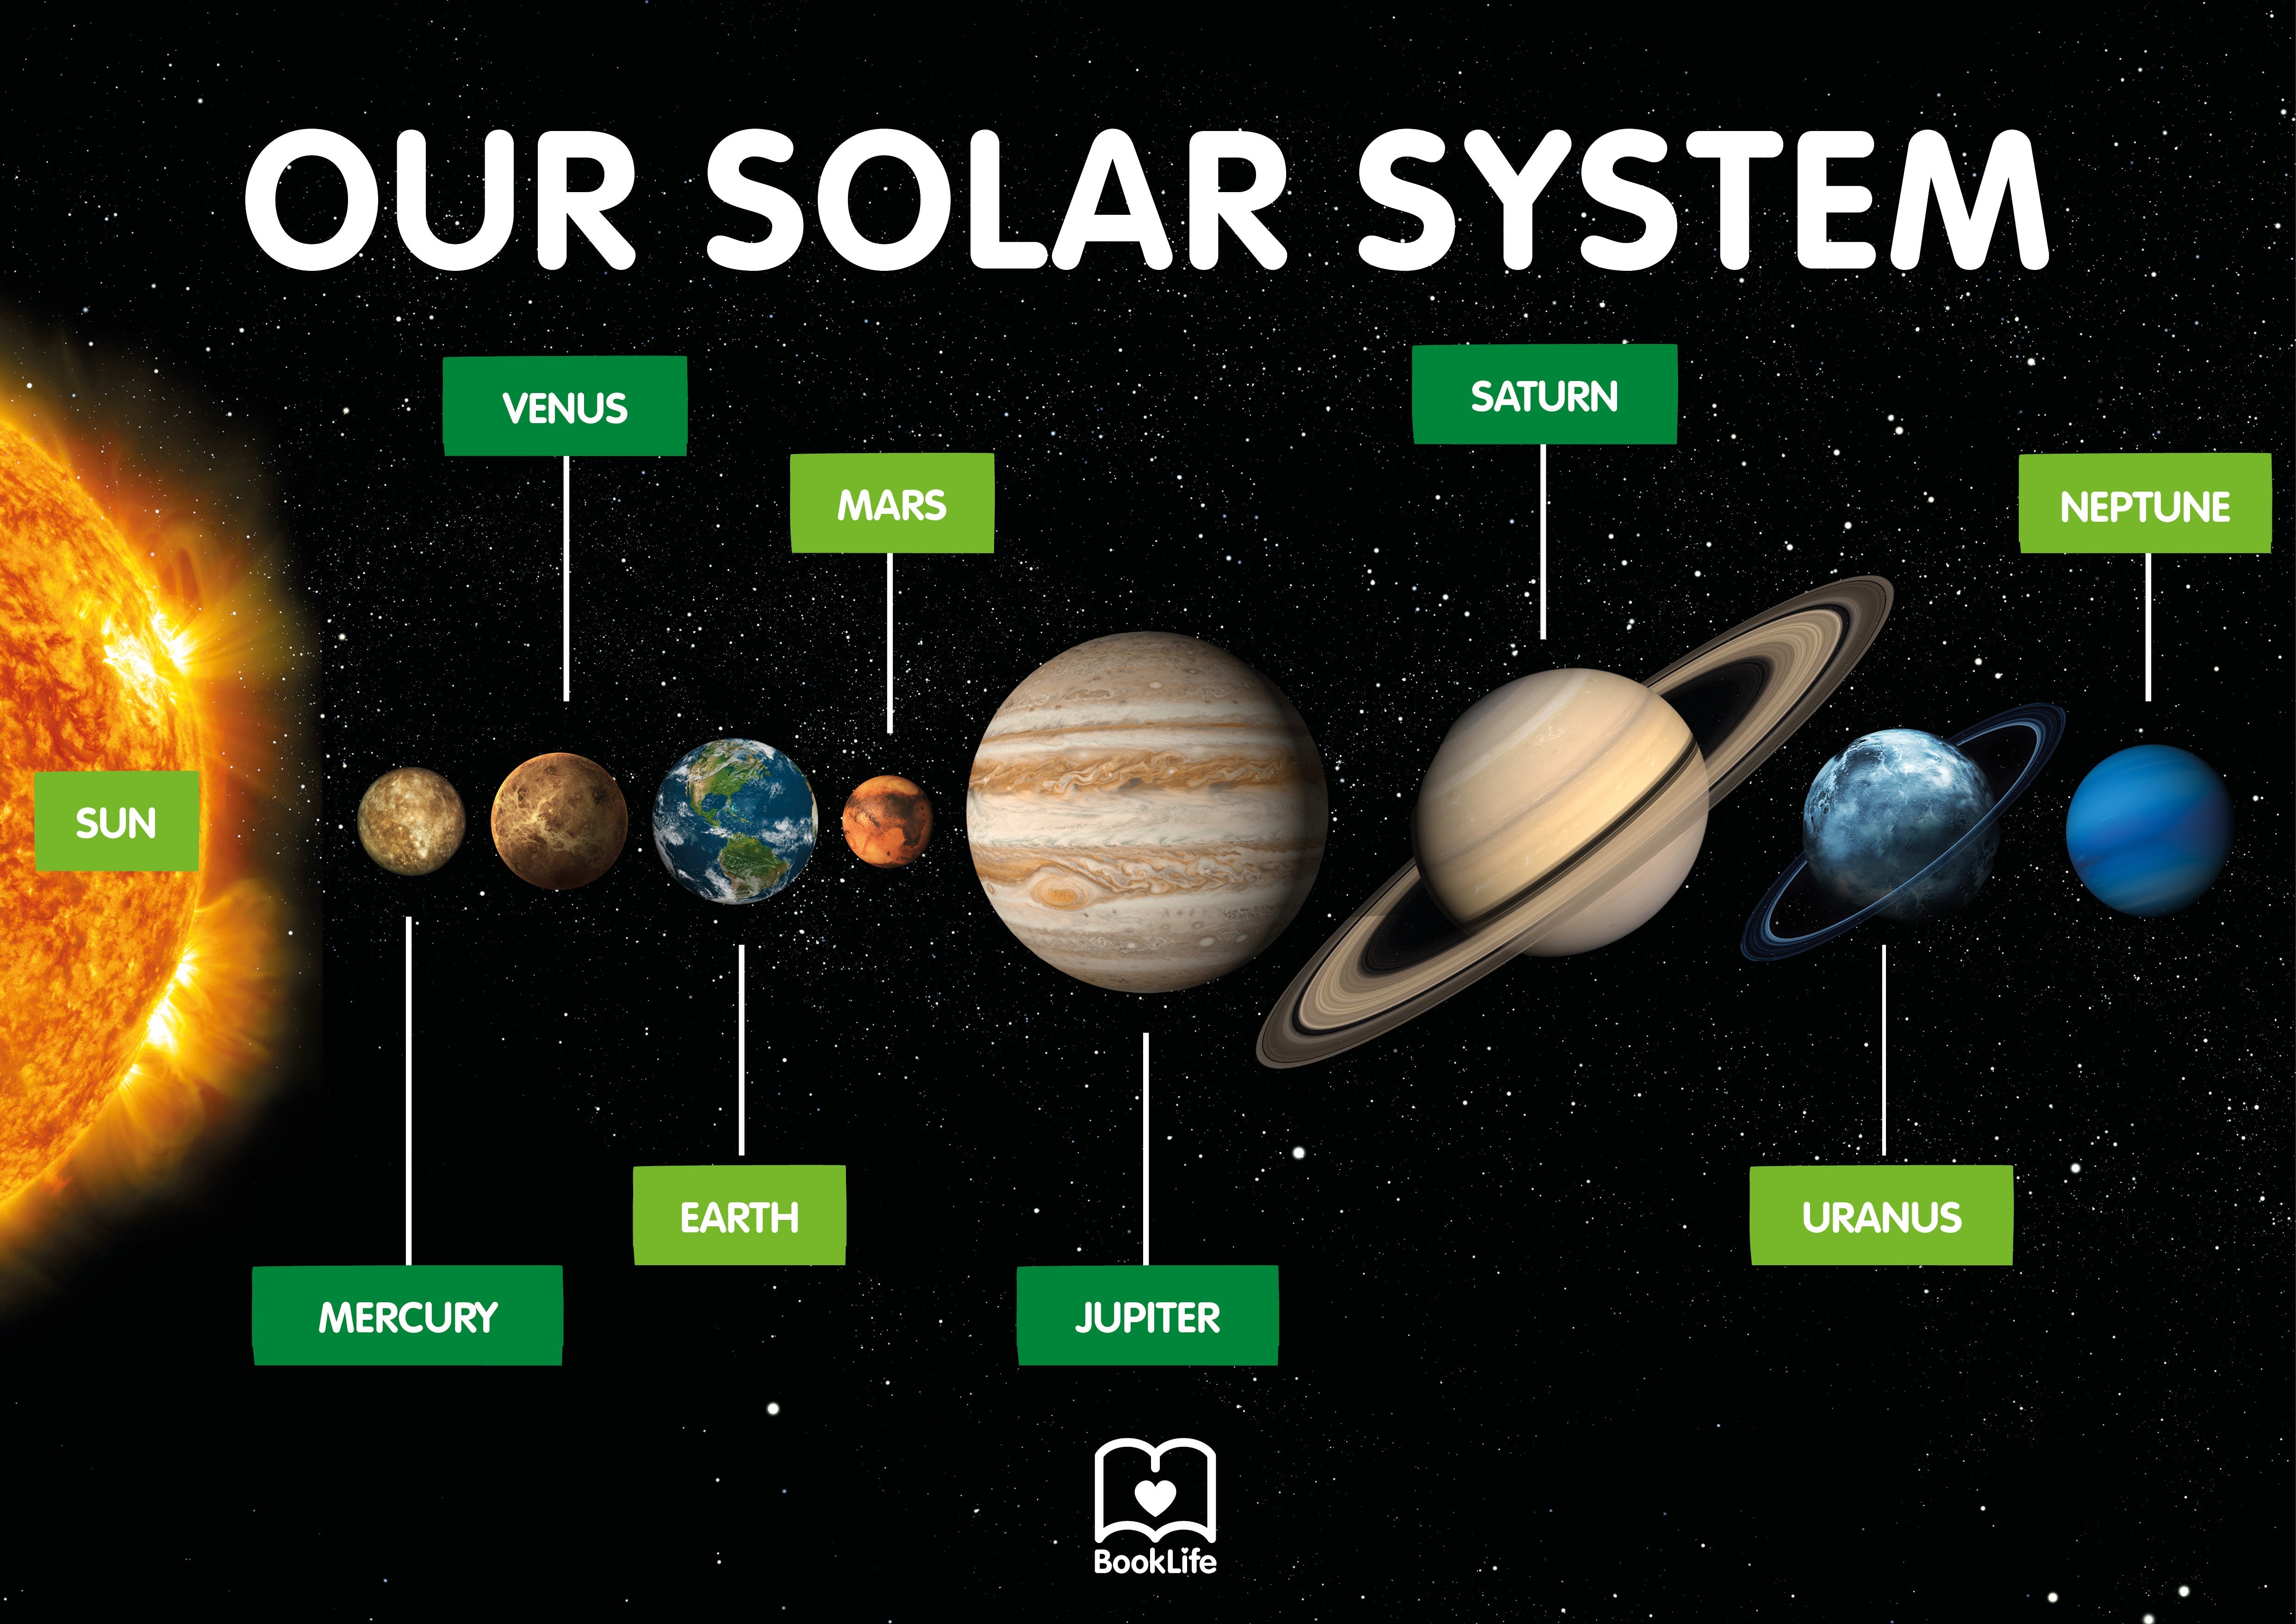 Free Our Solar System Poster by BookLife